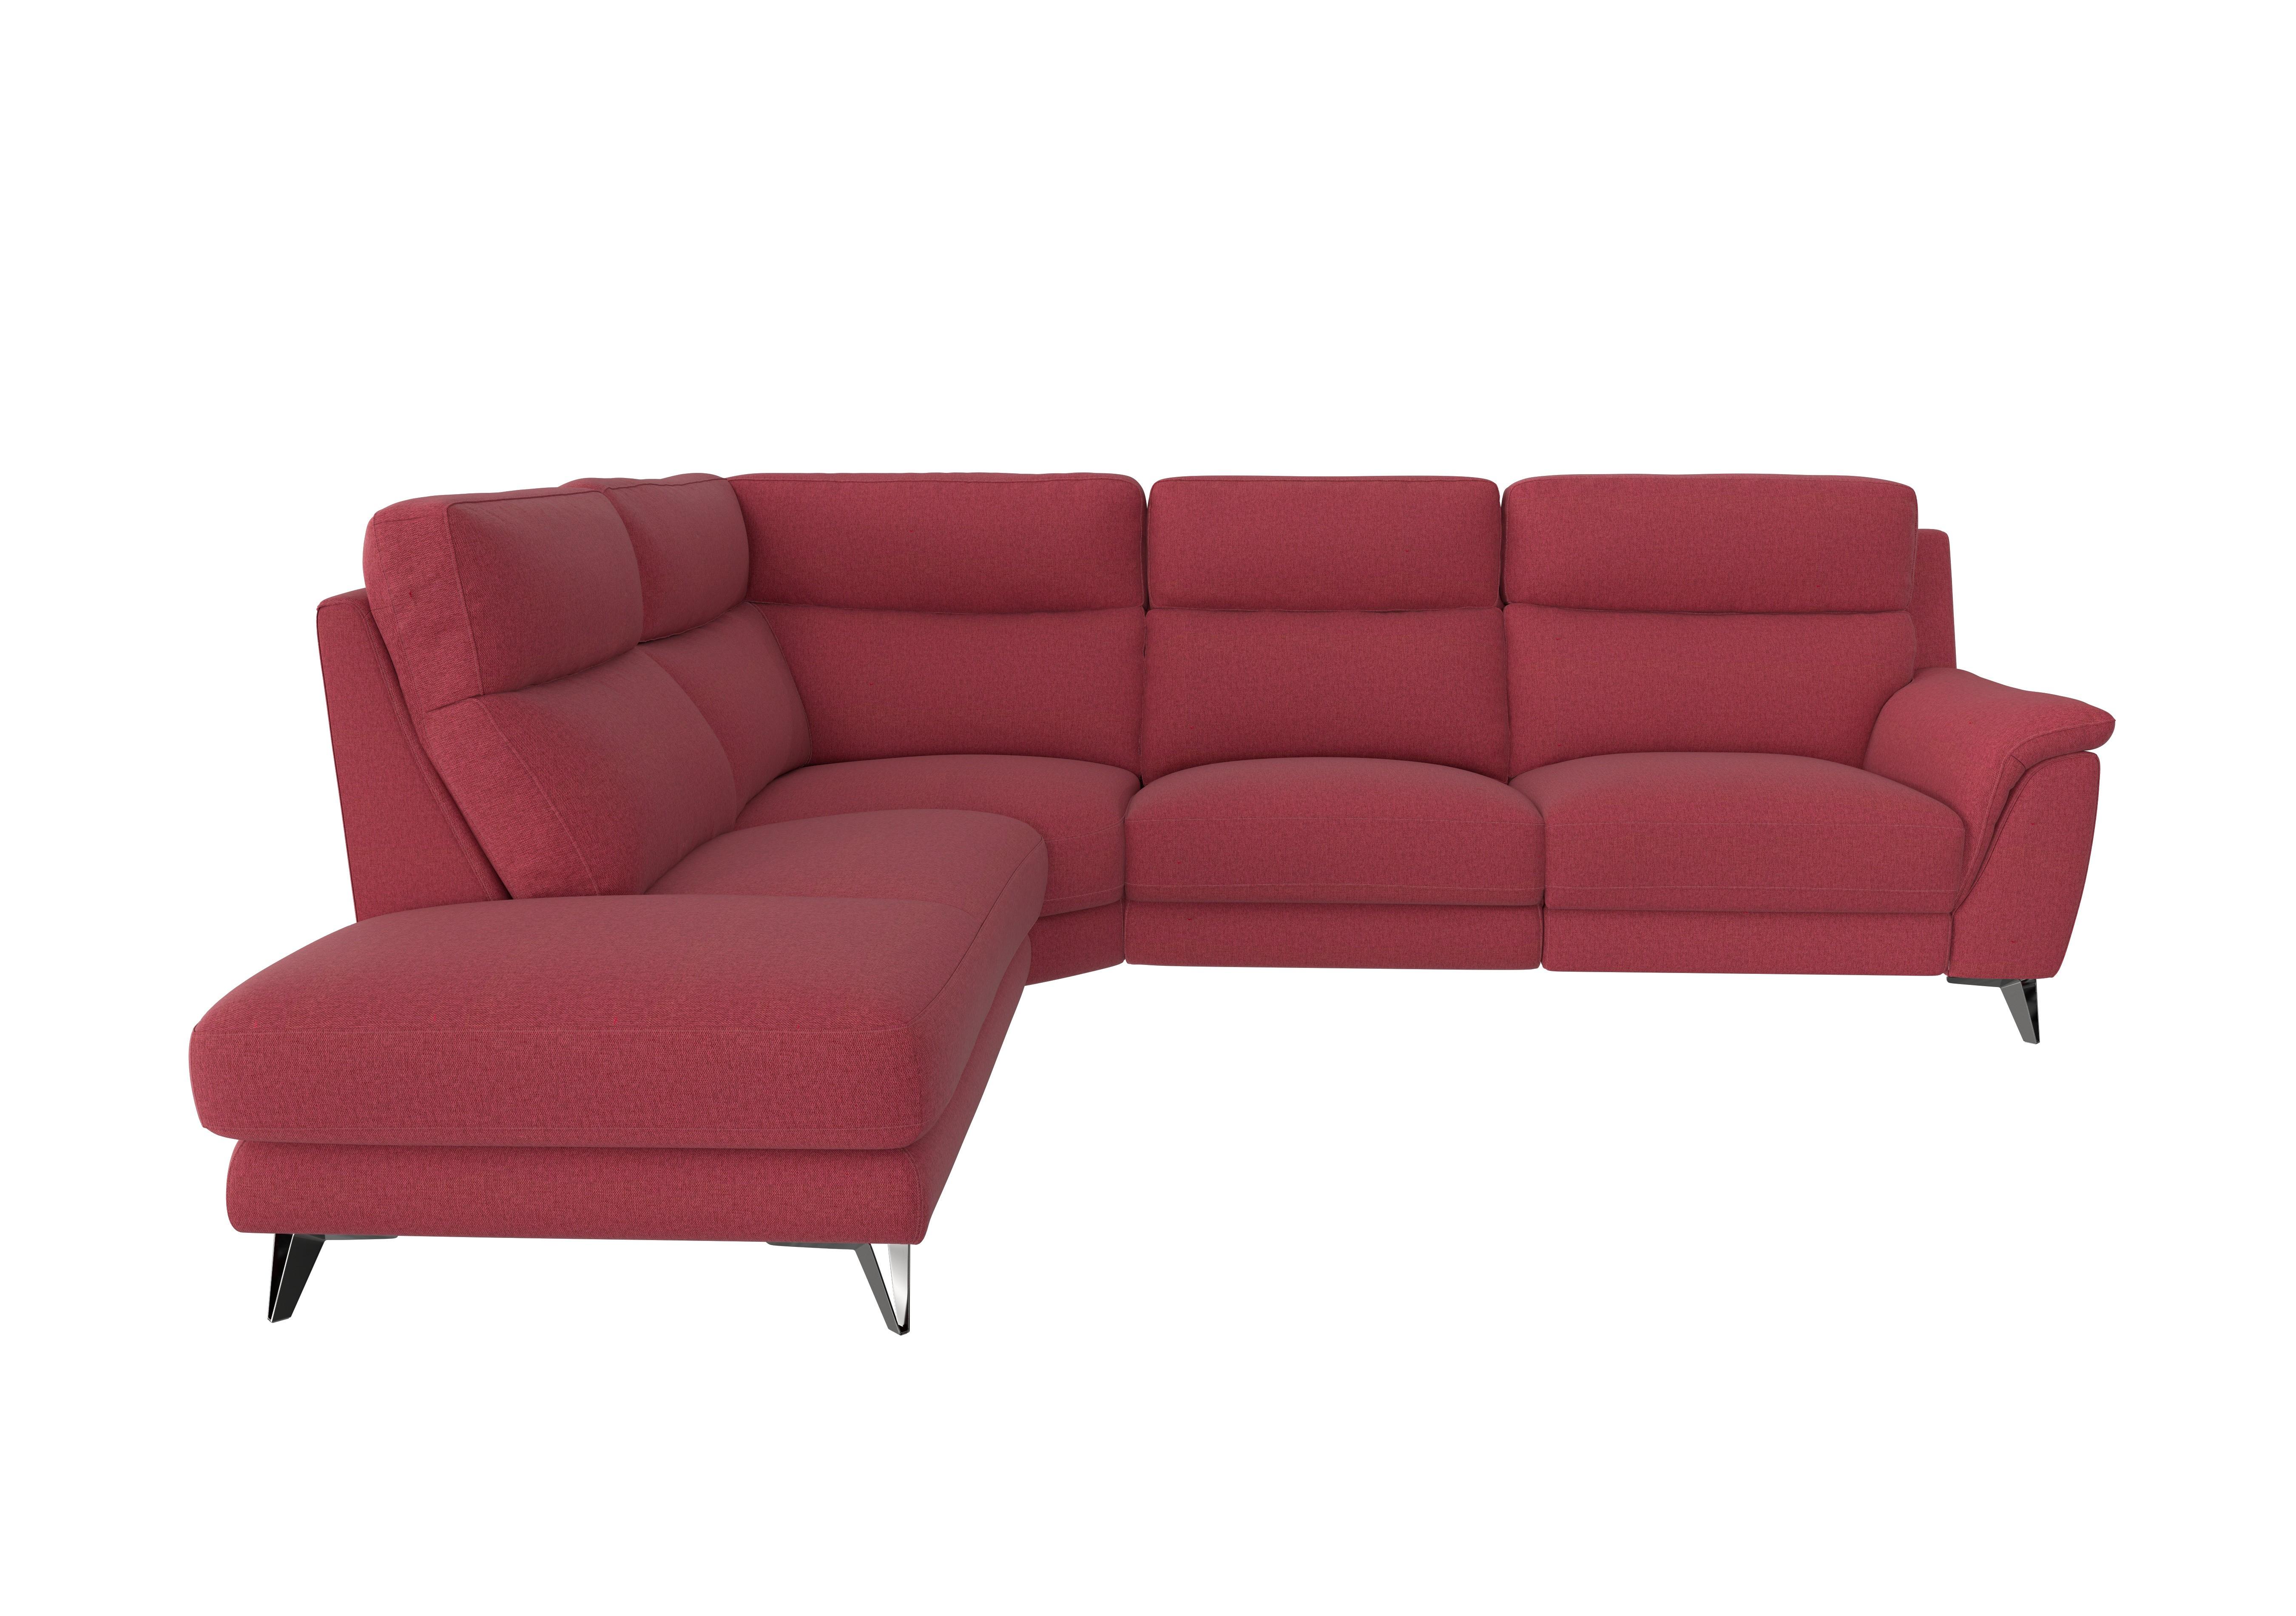 Contempo 3 Seater Chaise End Fabric Sofa in Fab-Blt-R29 Red on Furniture Village